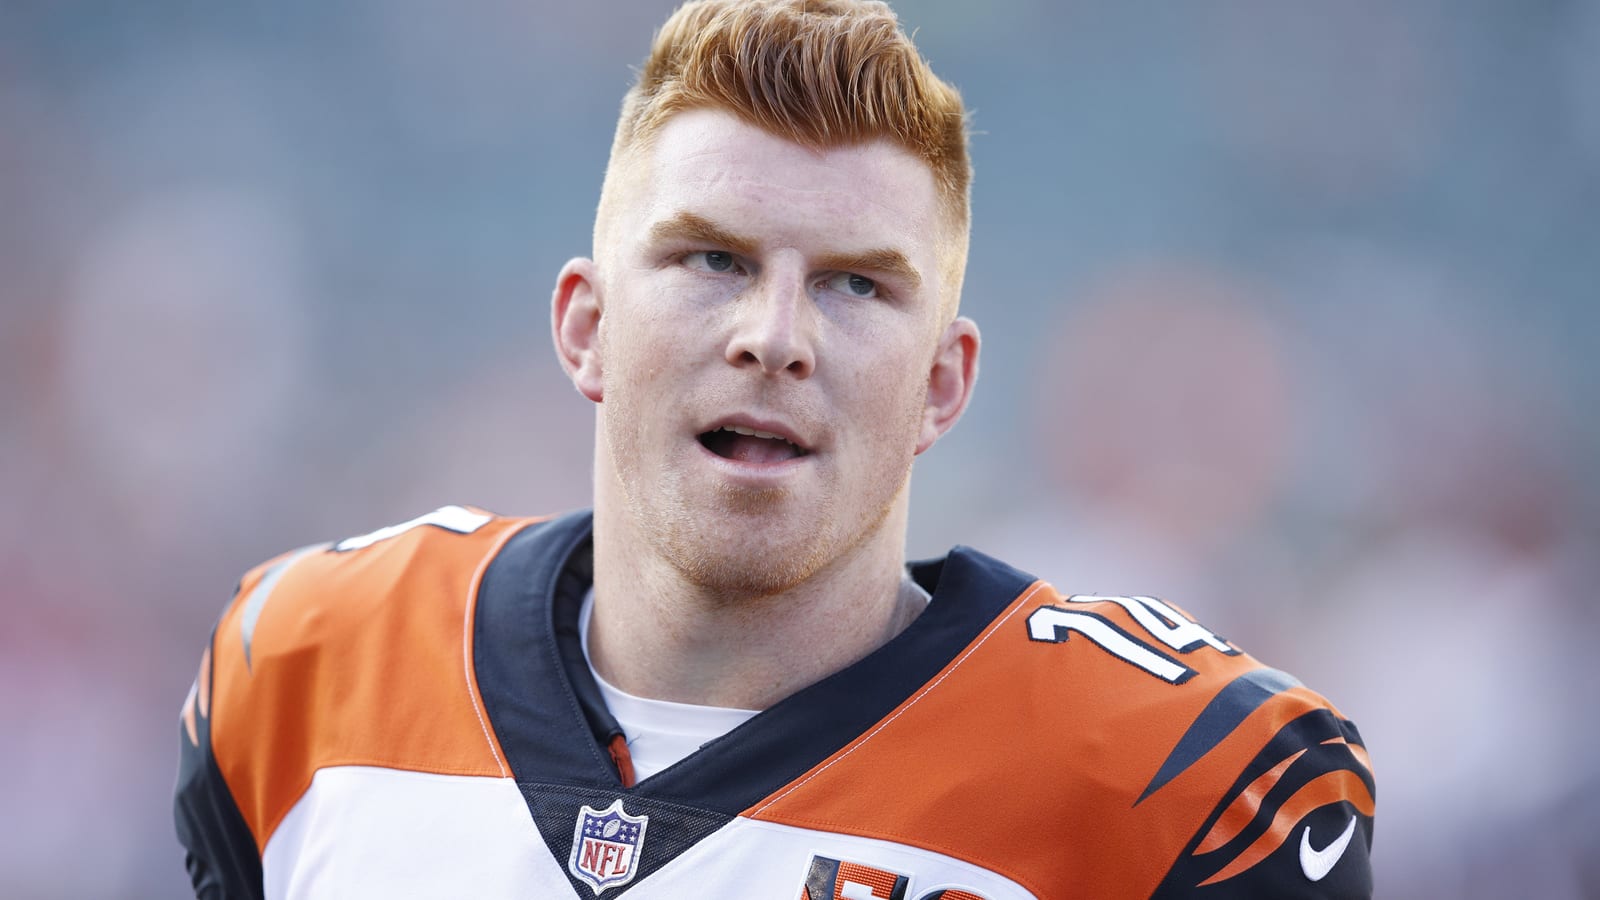 What's to become of Andy Dalton in Cincinnati?